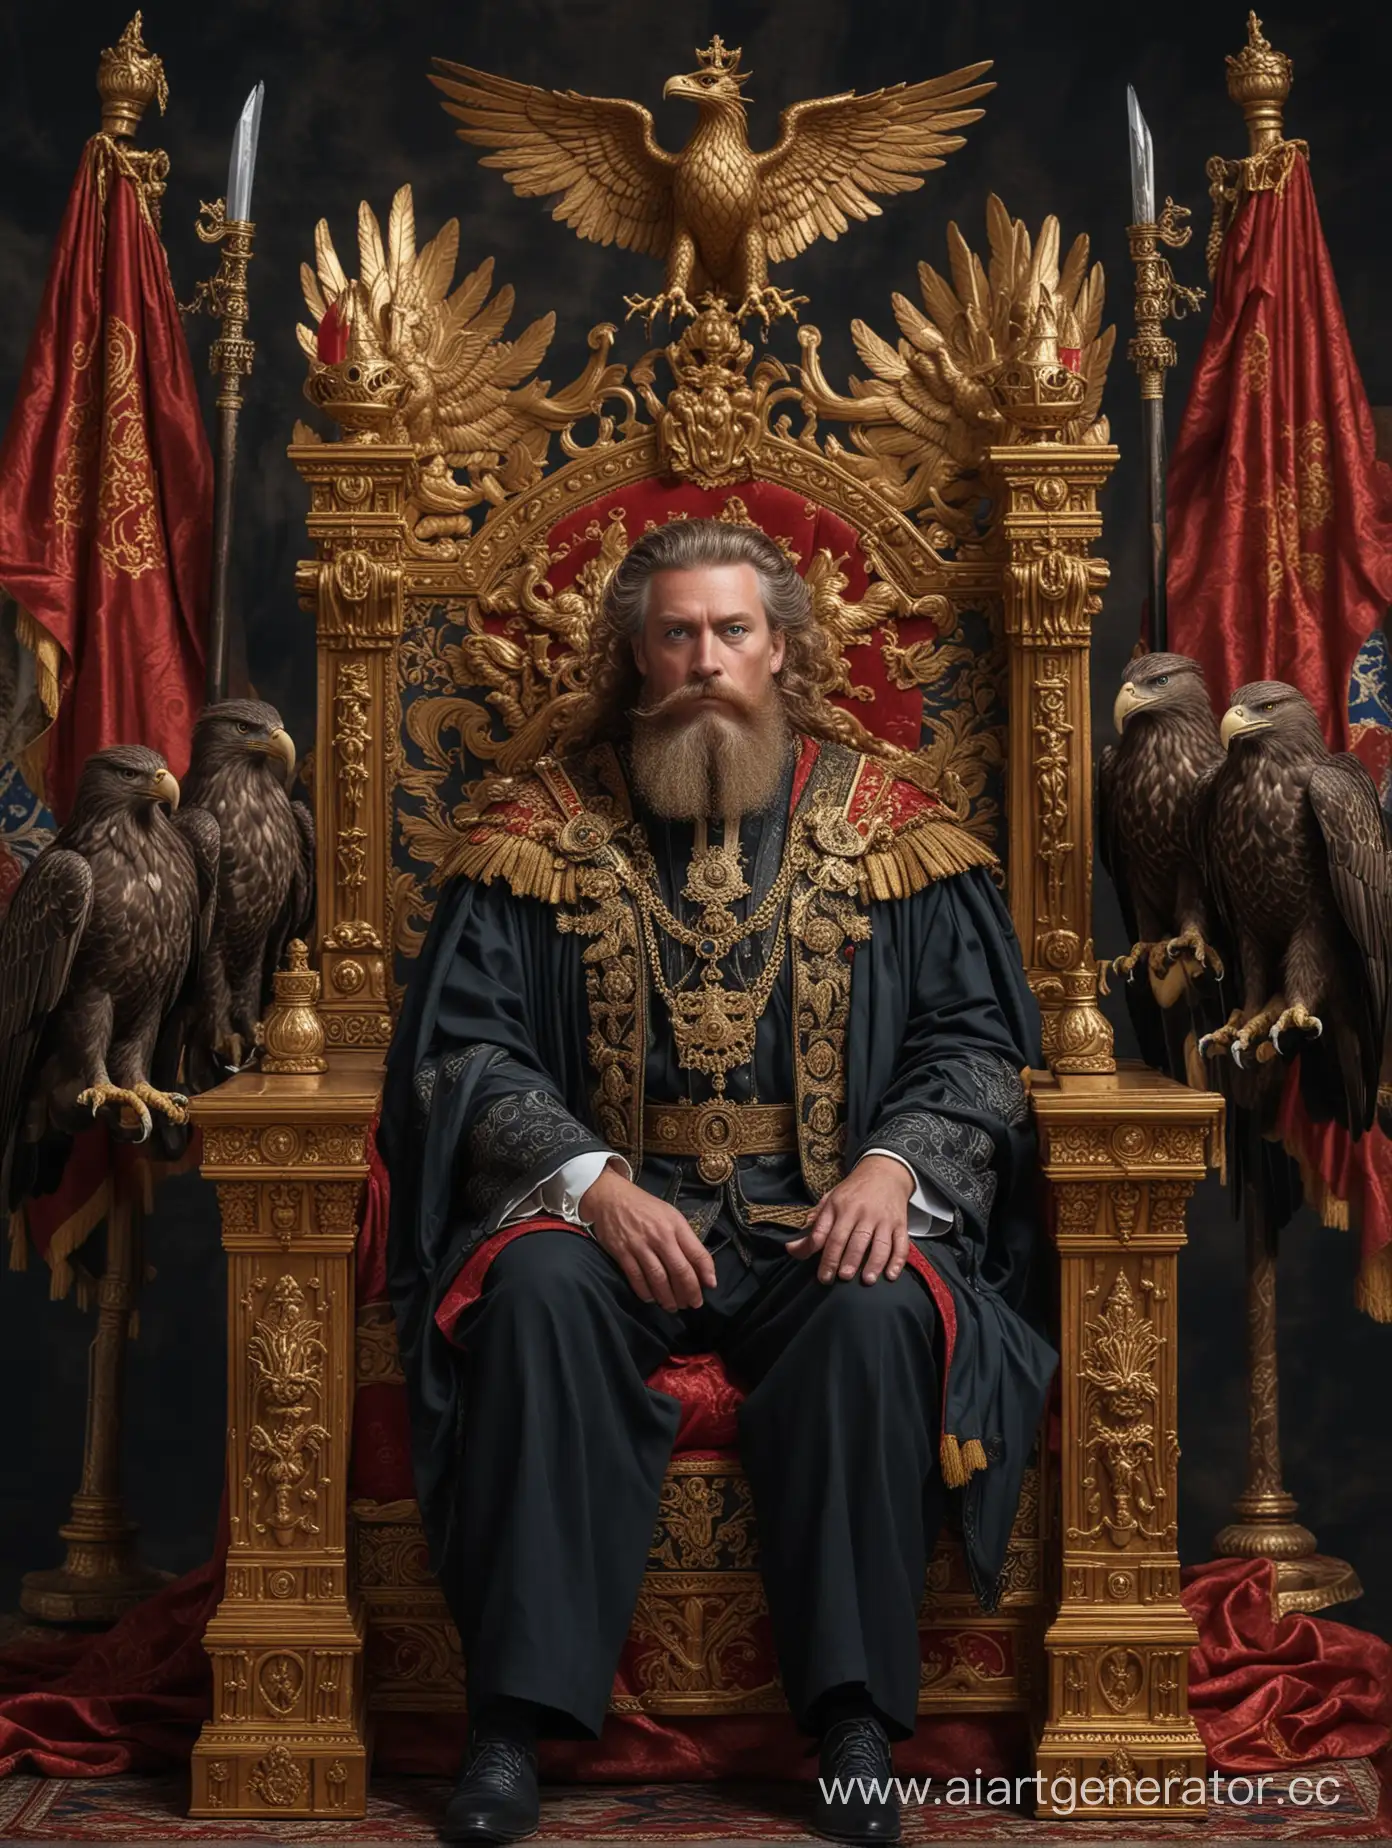 Regal-Emperor-with-Curly-Brown-Hair-and-Ornate-Throne